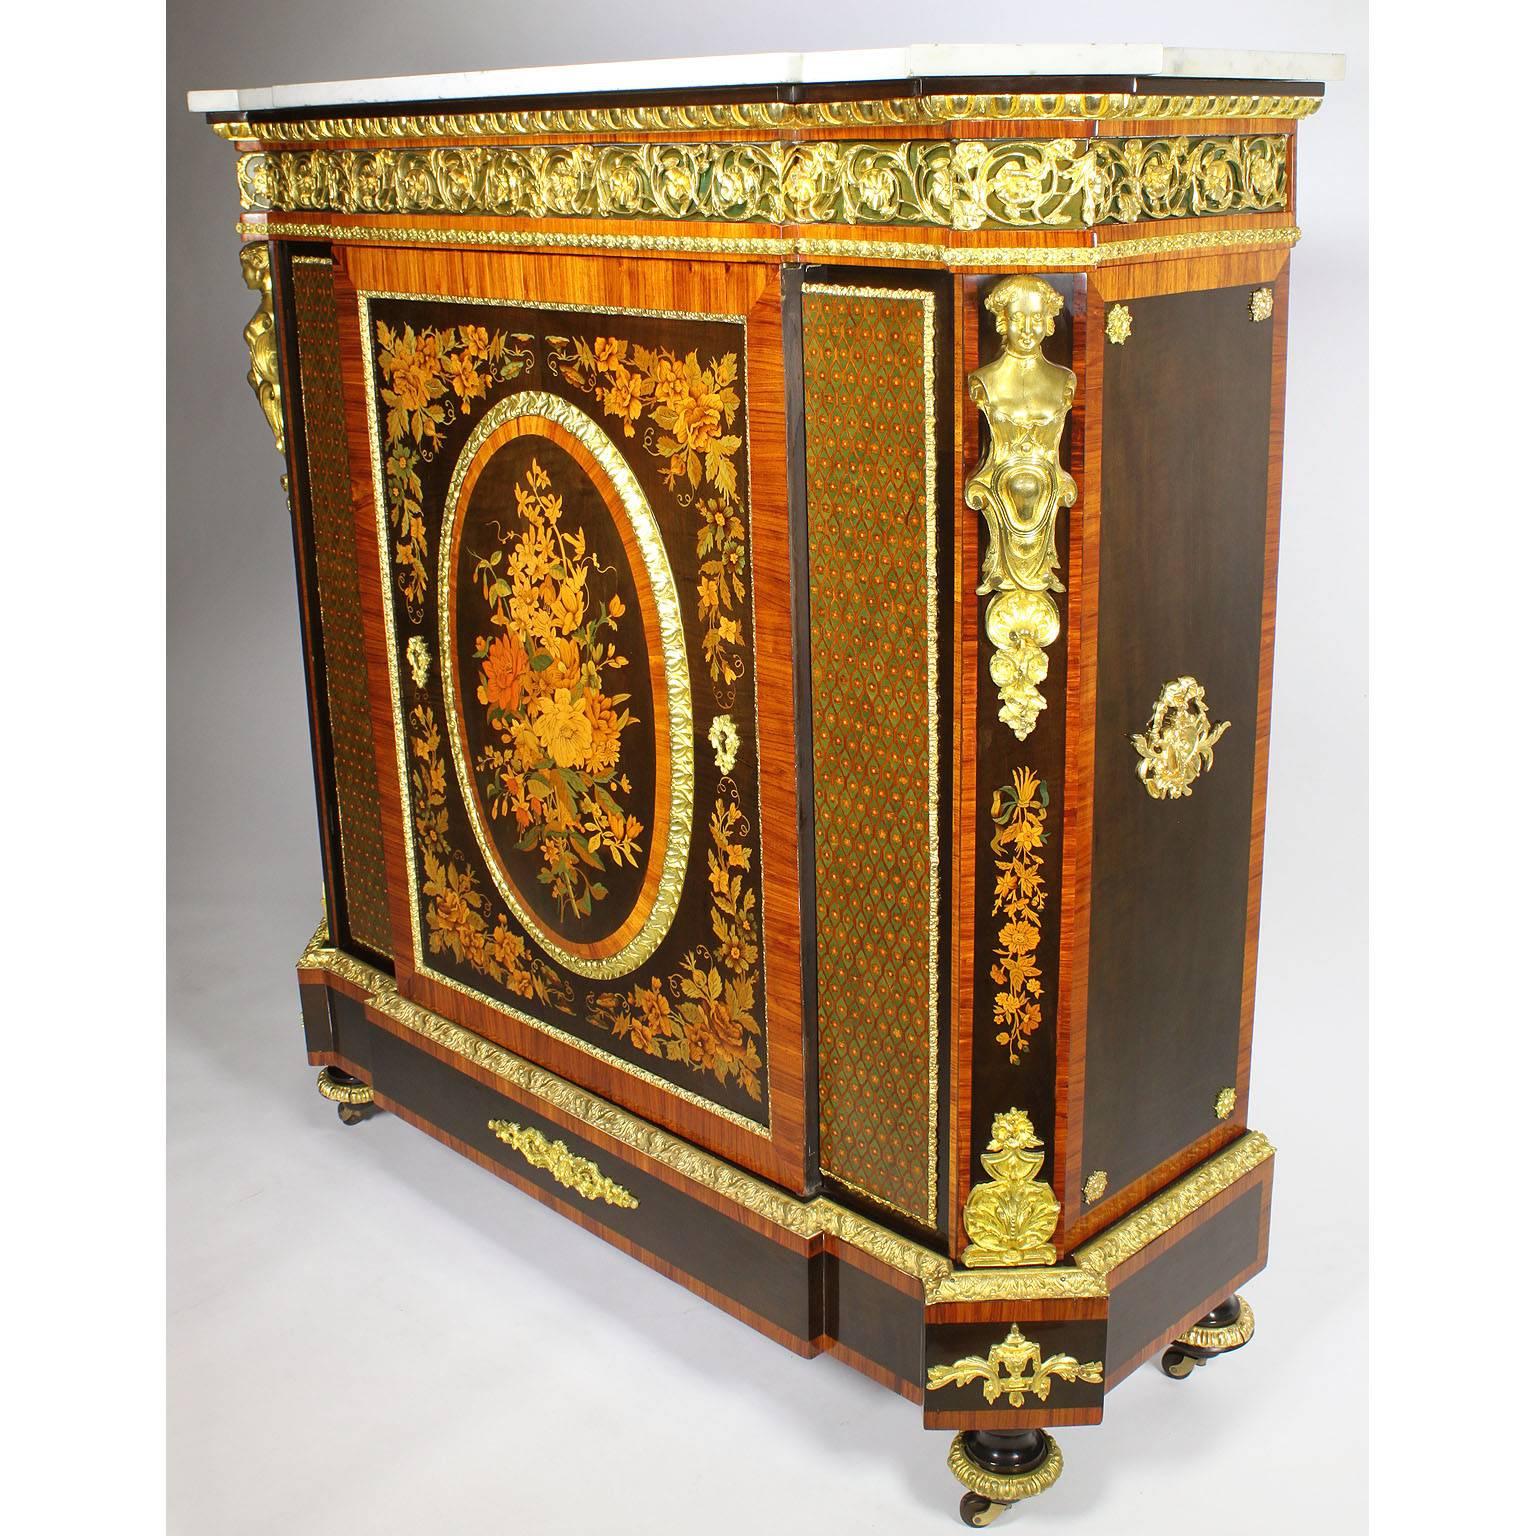 A very fine French Napoleon III gilt bronze mounted and marquetry meuble d'appui à hauteur (Side cabinet). The rectangular variegated white marble top with outset corners over a gilt foliate scroll mounted frieze above a door centering an oval leaf